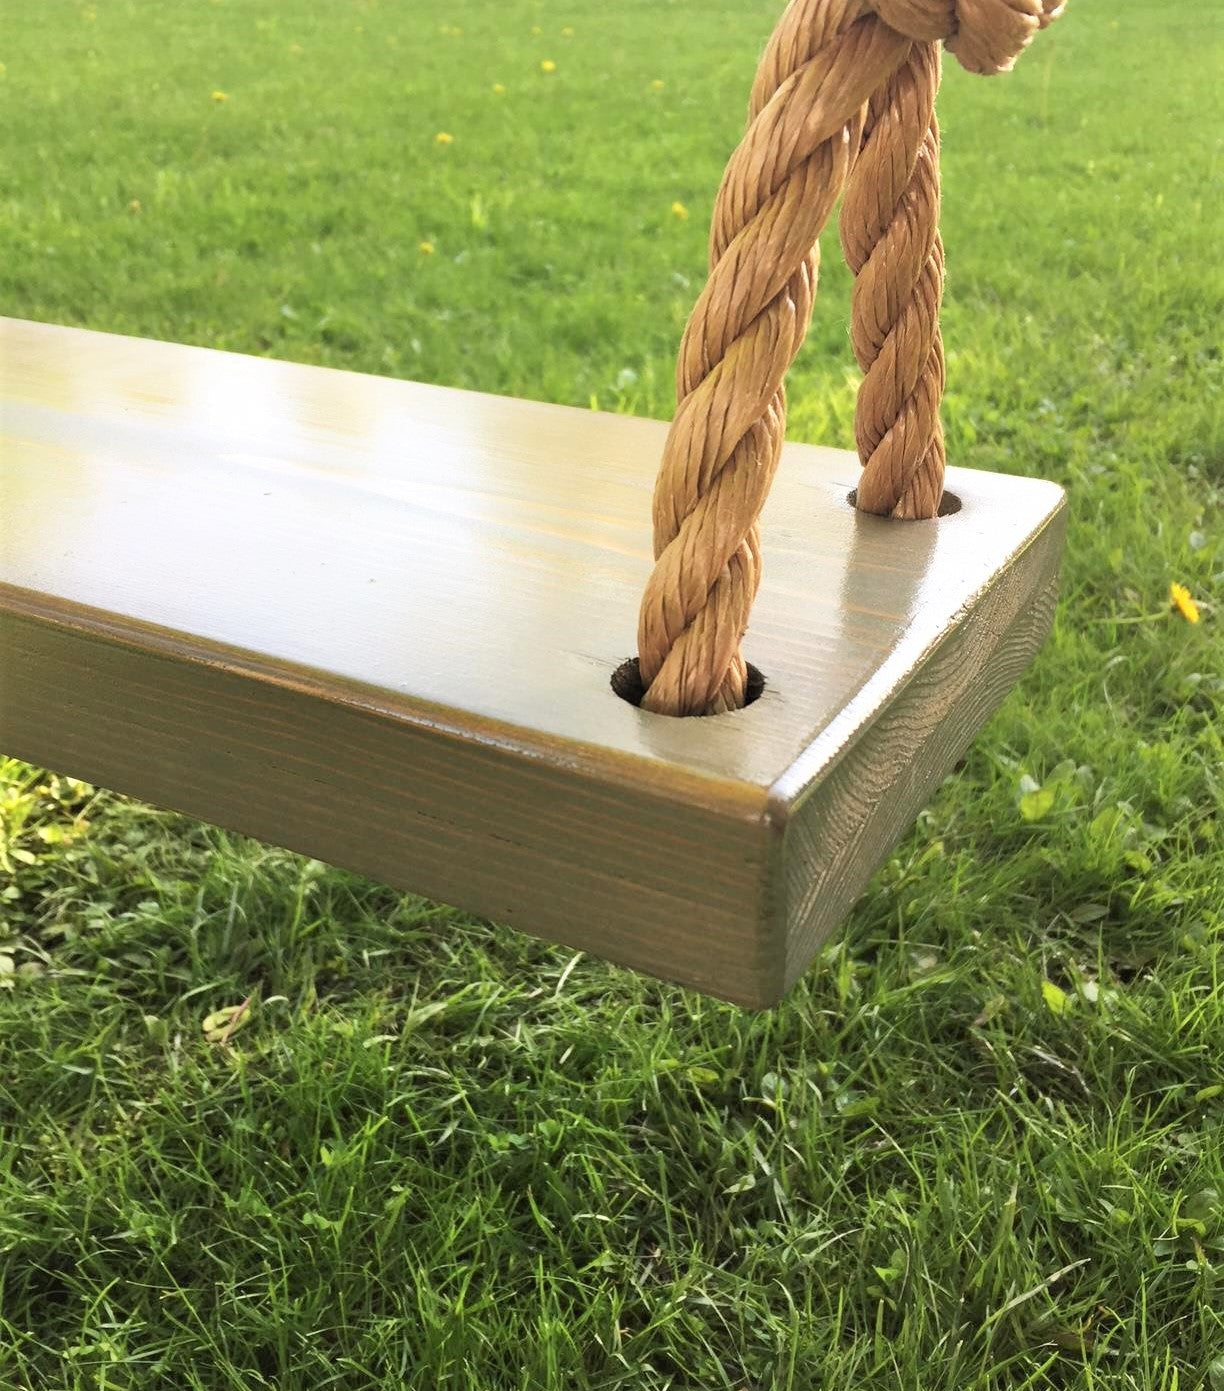 Customized or Blank Wooden Rope Swing 23” x 11” – Burnt Timber Swings